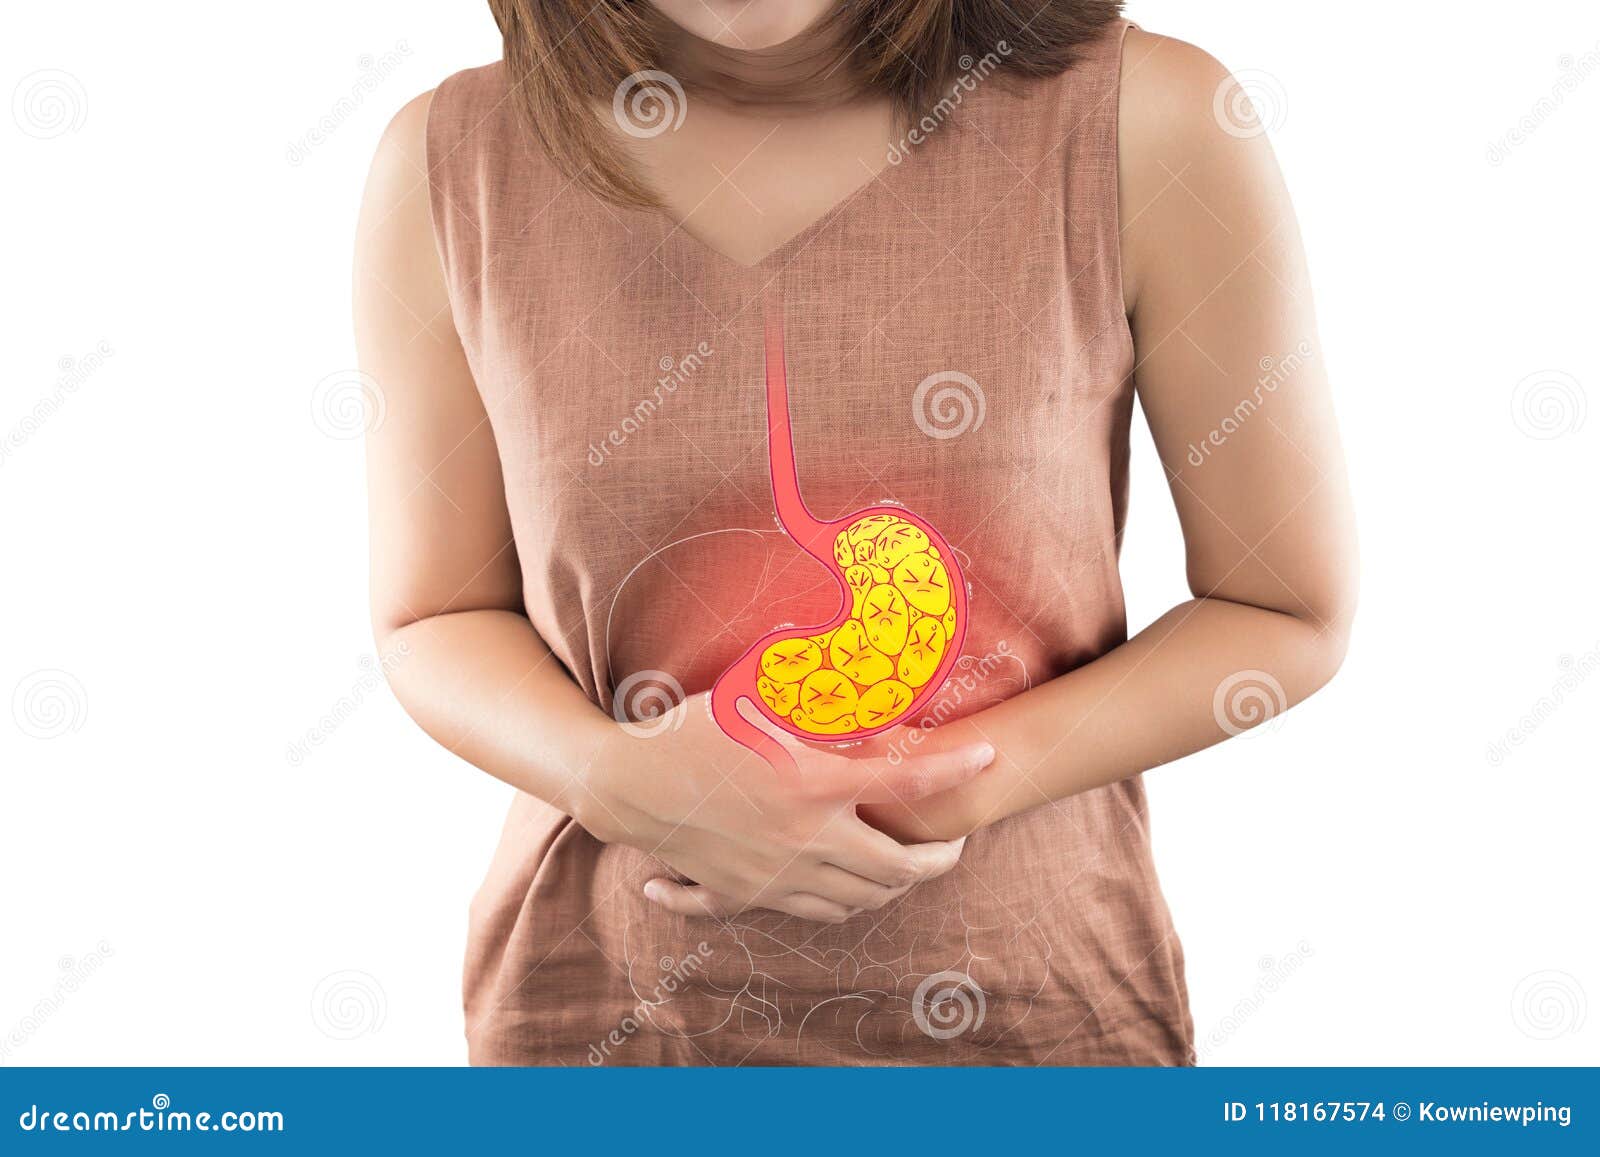 woman suffering from indigestion or gastric.